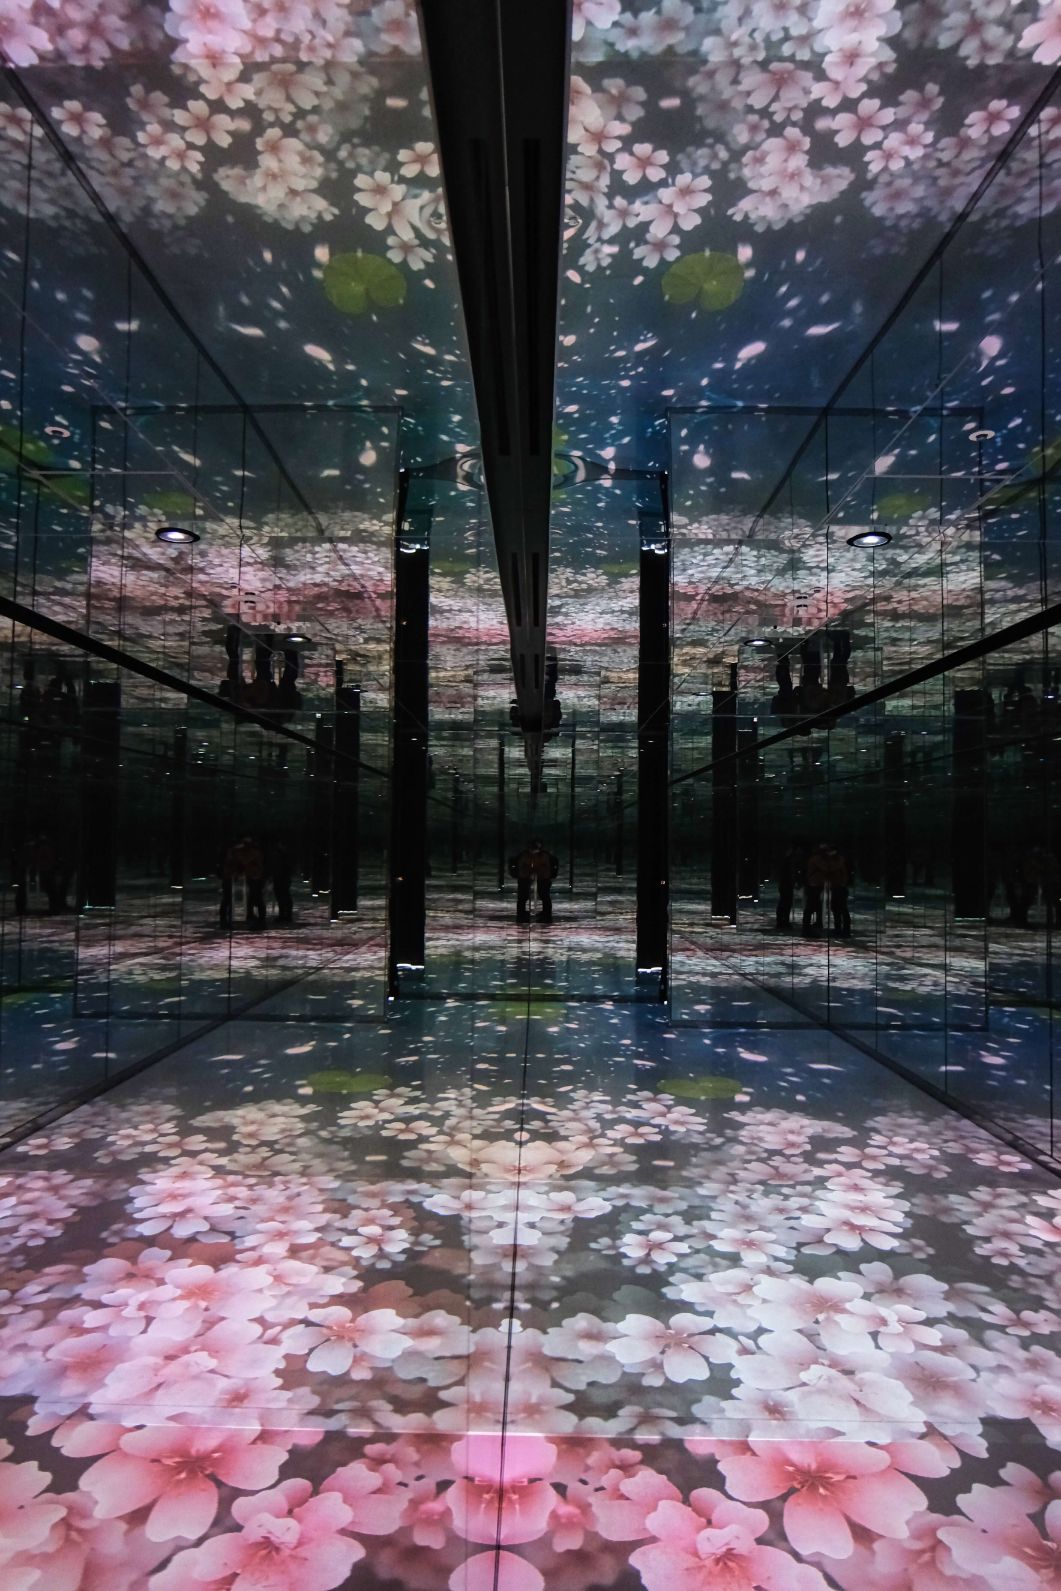 The best exhibit they have is this fully mirrored room. A animation is projected which is reflected by tens of mirrors.